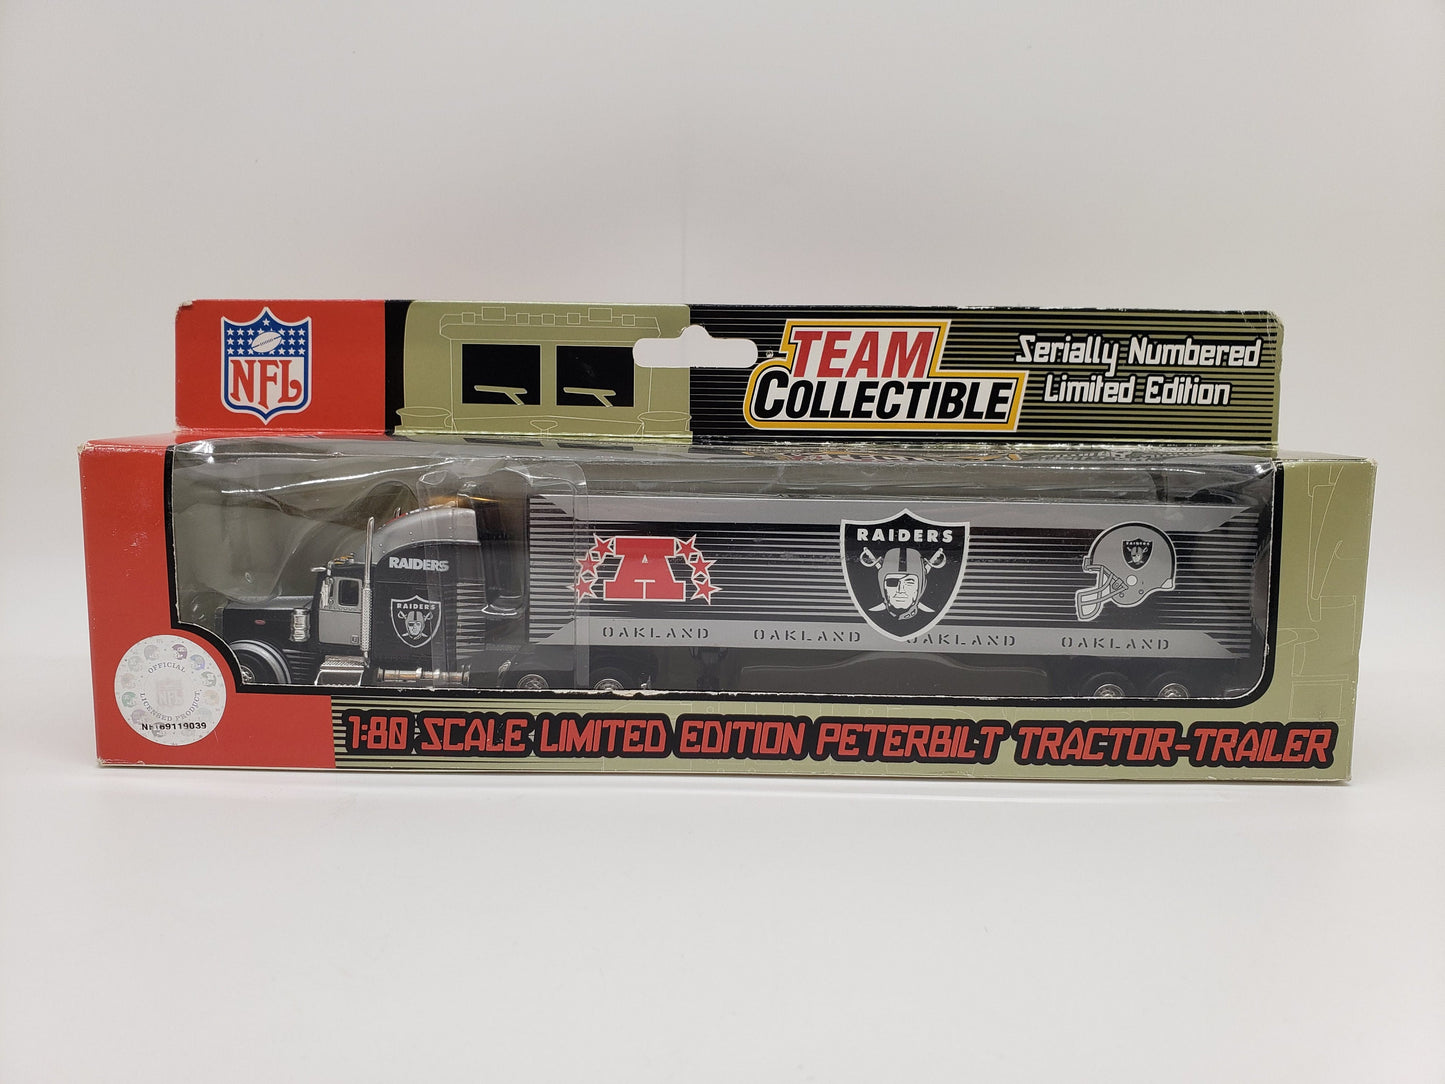 Peterbilt Tractor-Trailer Oakland Raiders Silver and Black Fleer Collectable Scale Miniature Model Toy Car Perfect Birthday Gift